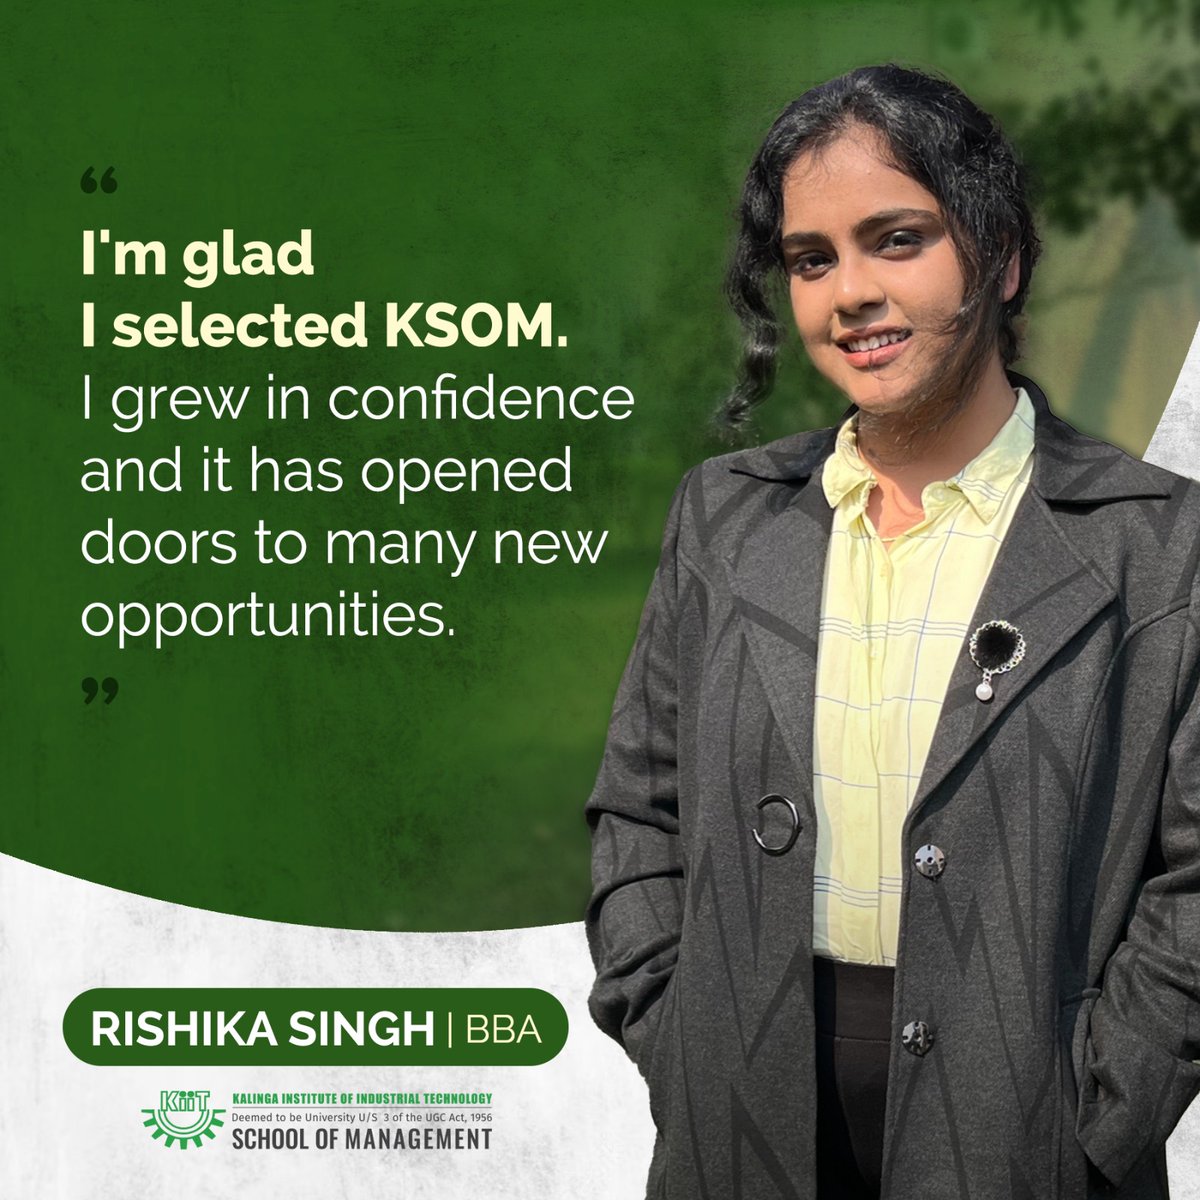 'KSOM has contributed significantly to building my confidence and opening up many opportunities,' says Rishika Singh.

#ksombbsr #testimonial #BBA #lifeatksom #Bhubaneswar #opportunities #kiit #bschool